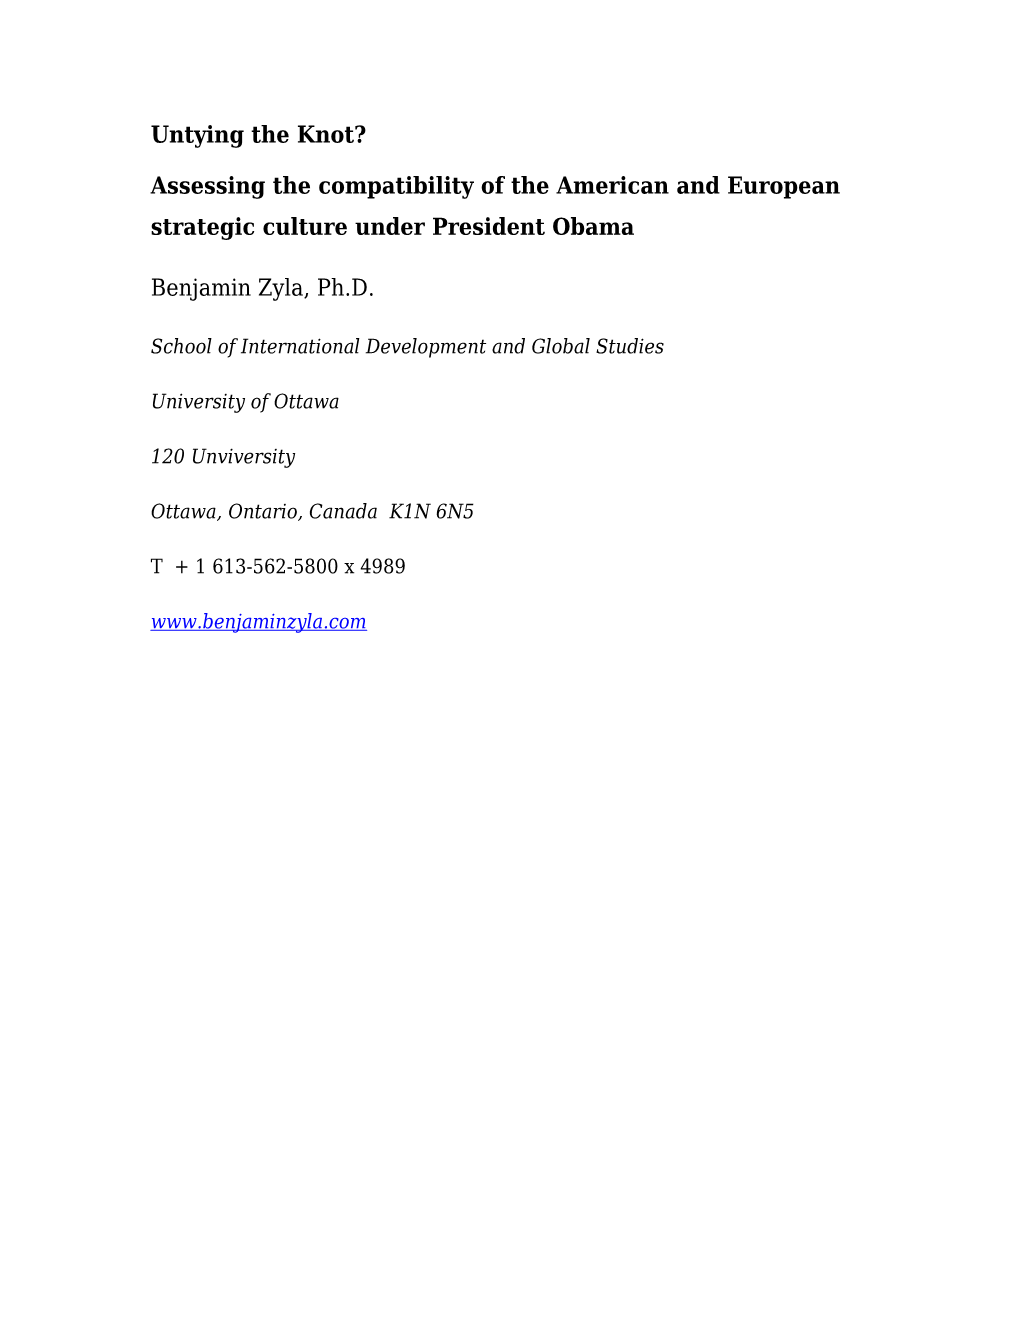 Assessing the Compatibility of the American and European Strategic Culture Under President